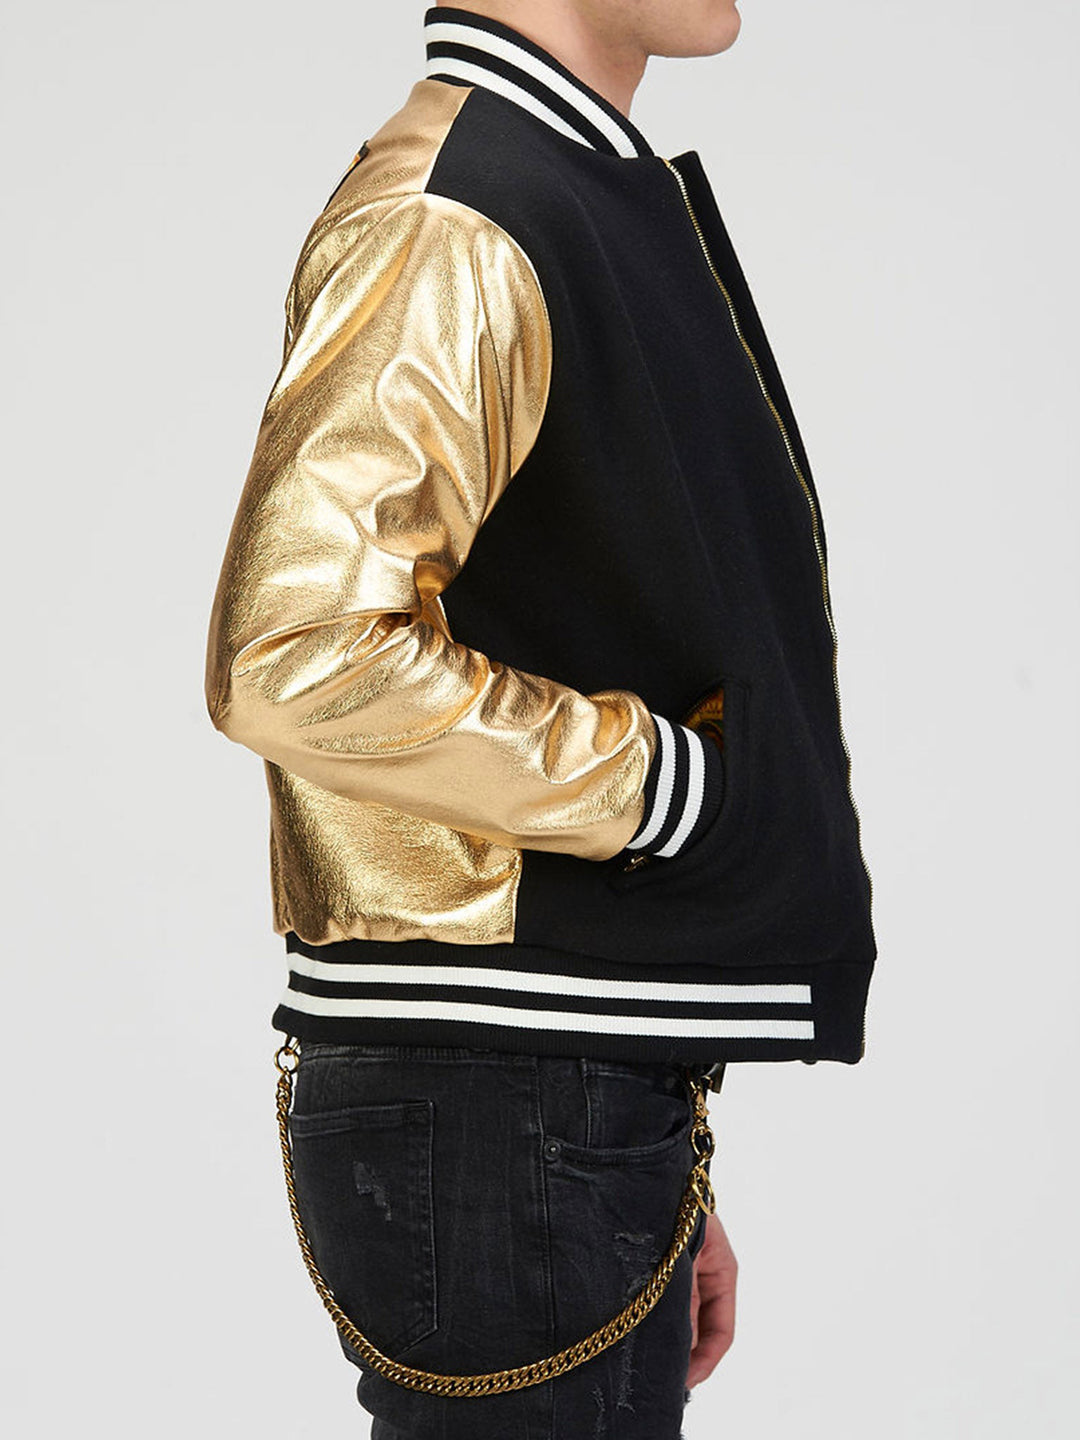 Letterman jacket with gold sleeves